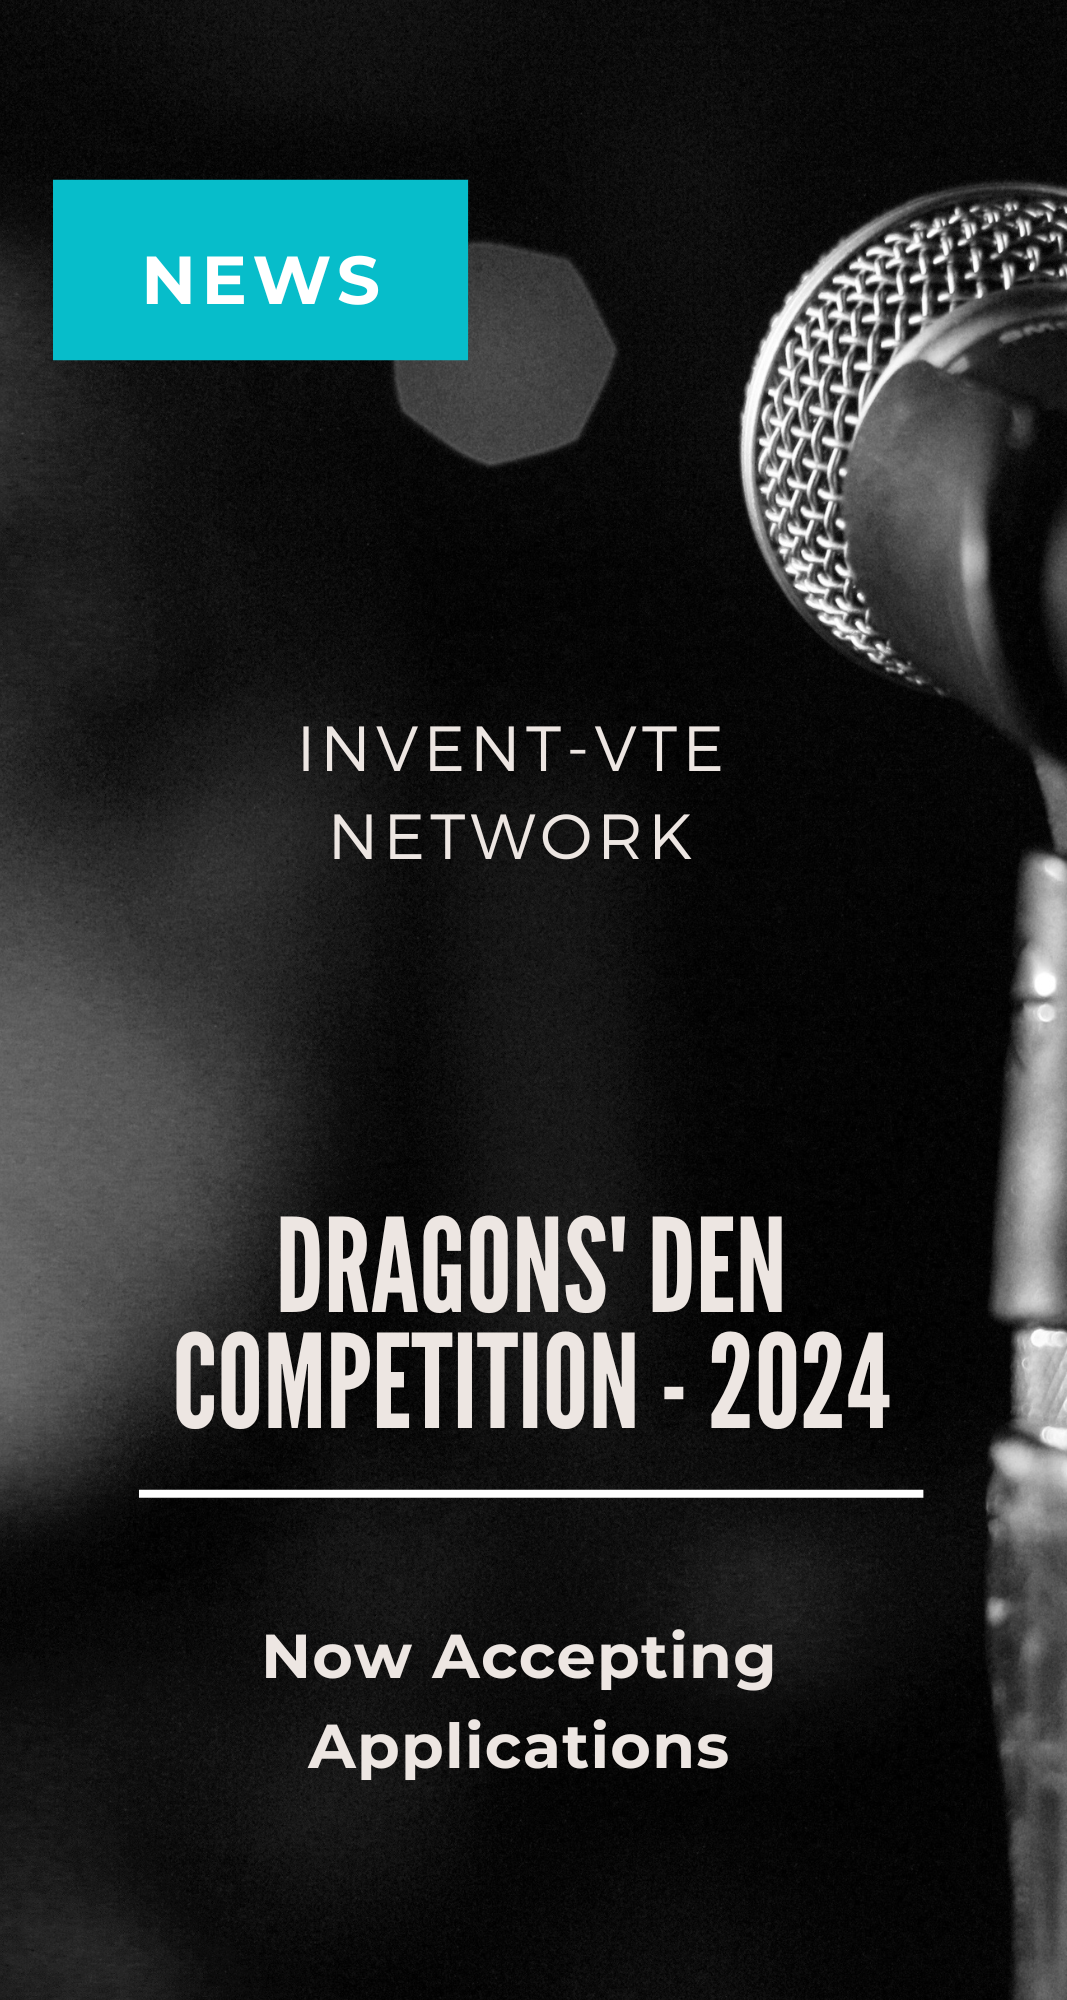 CALL FOR APPLICATIONS: DRAGONS' DEN COMPETITION AT ISTH 2024